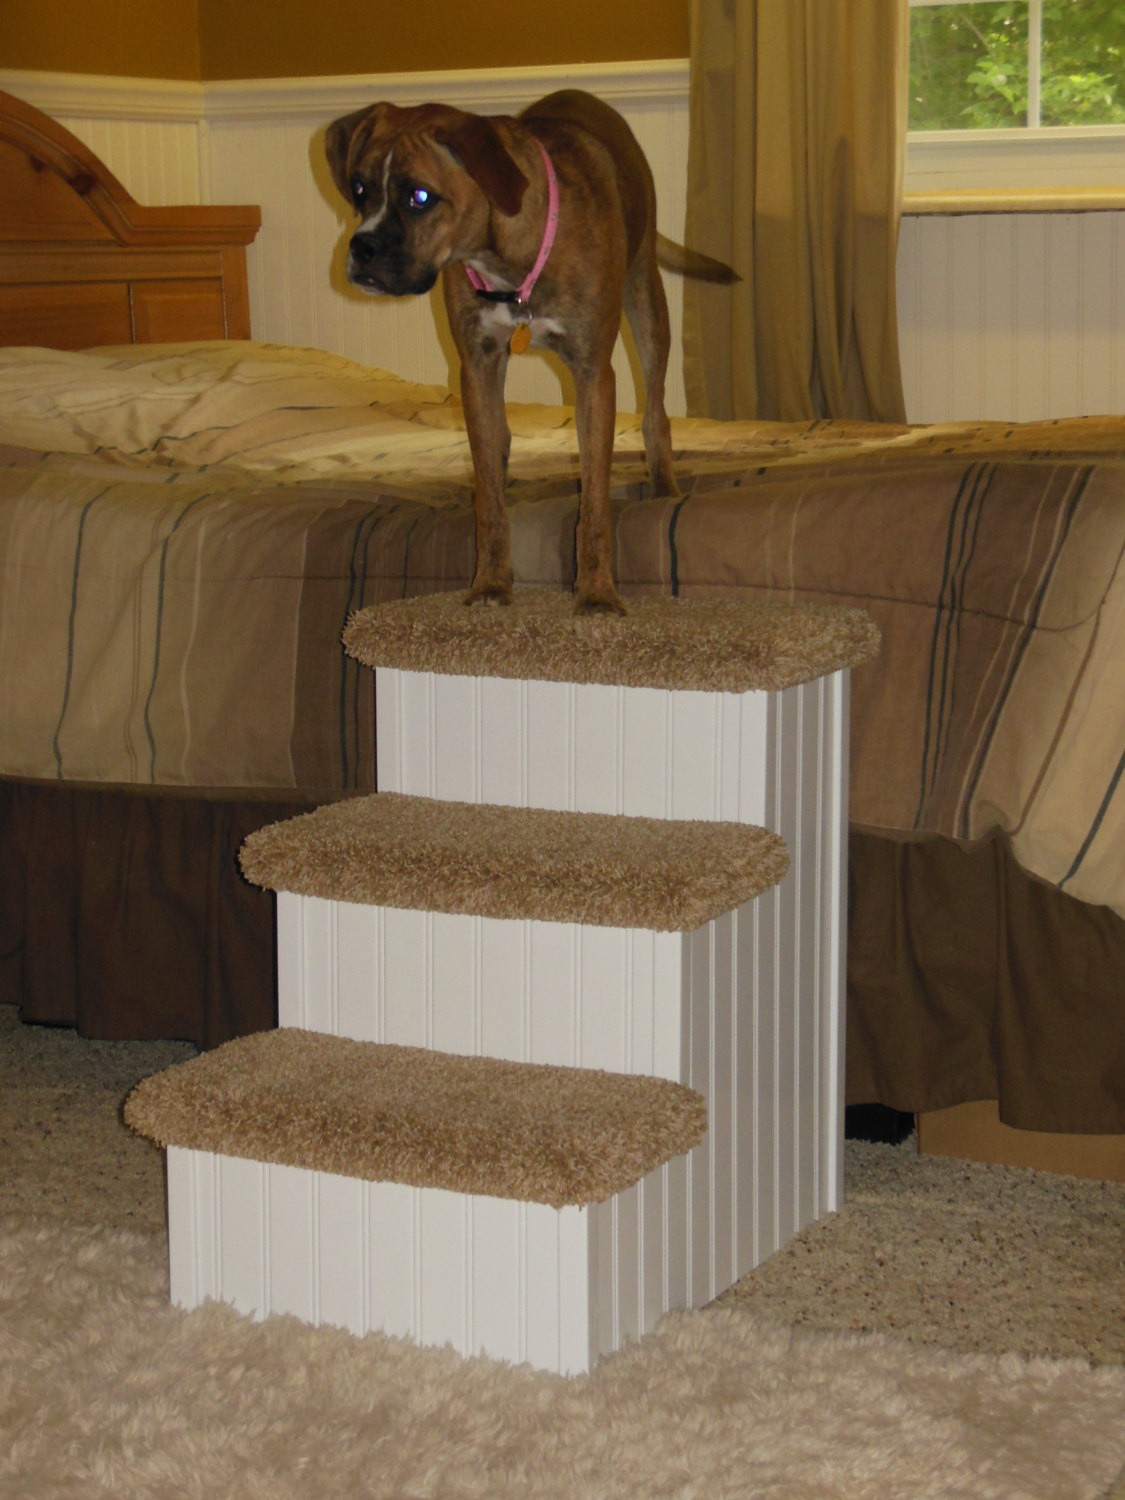 Steps for large breed dogs